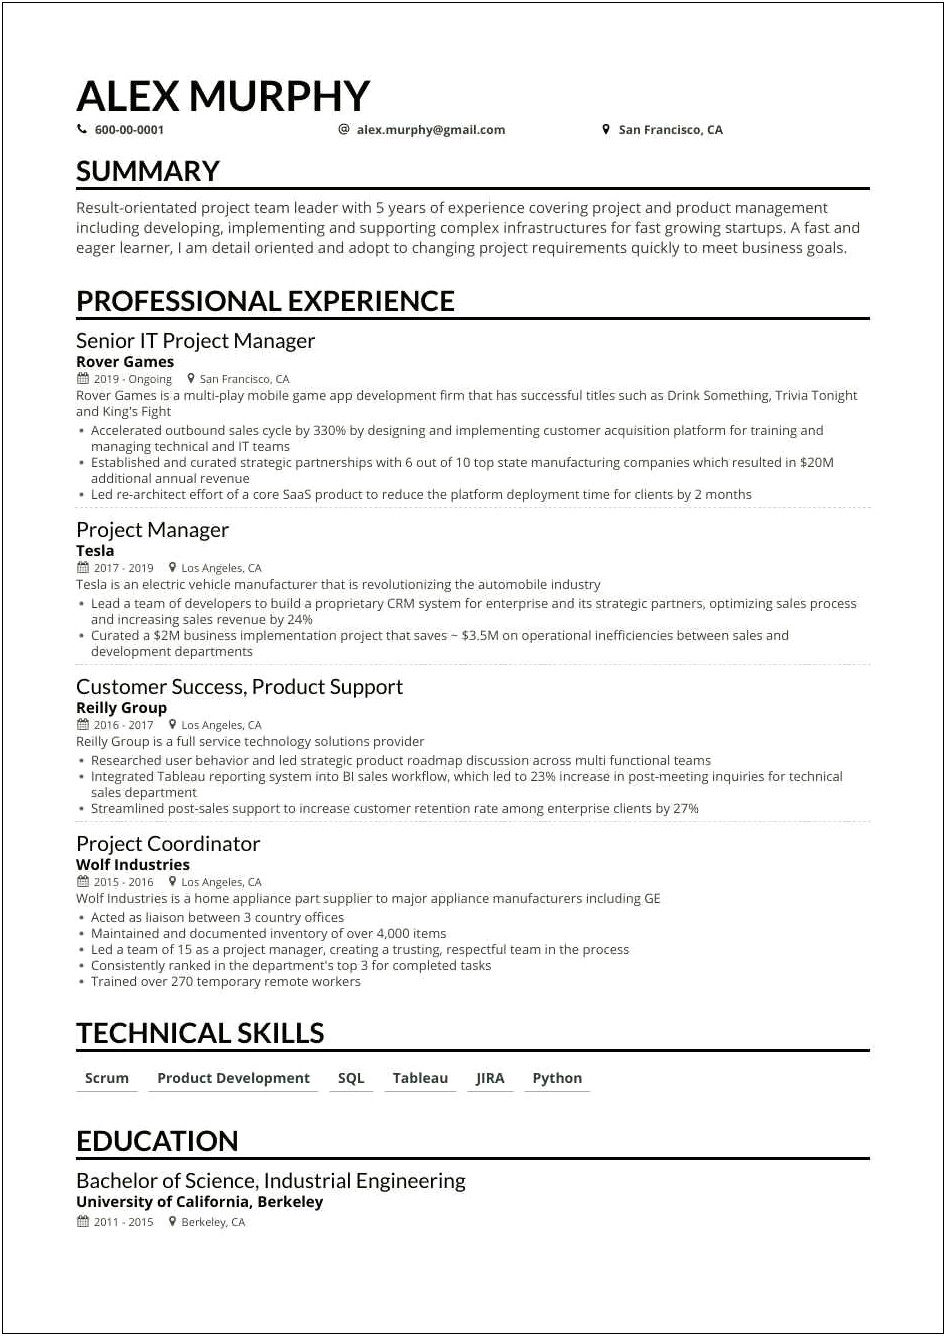 Technical Support Supervisor Resume Example